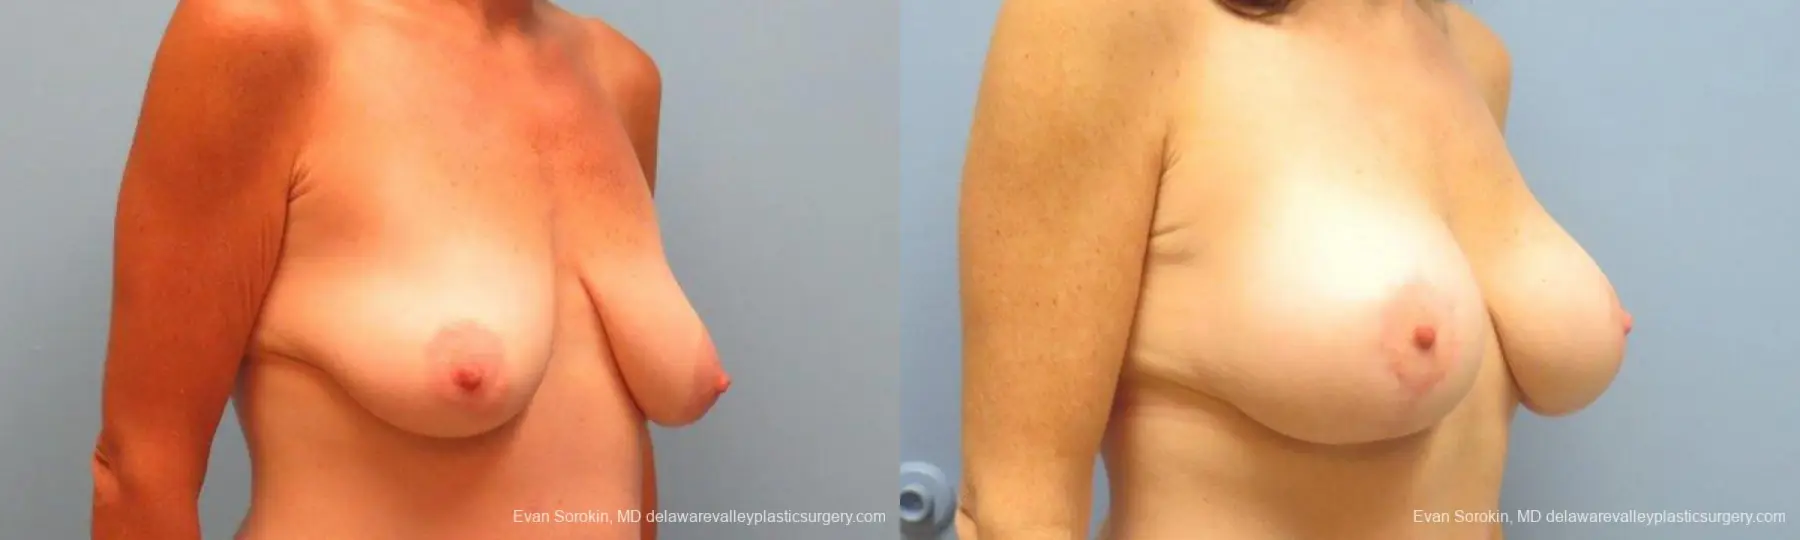 Philadelphia Breast Lift and Augmentation 9486 - Before and After 2